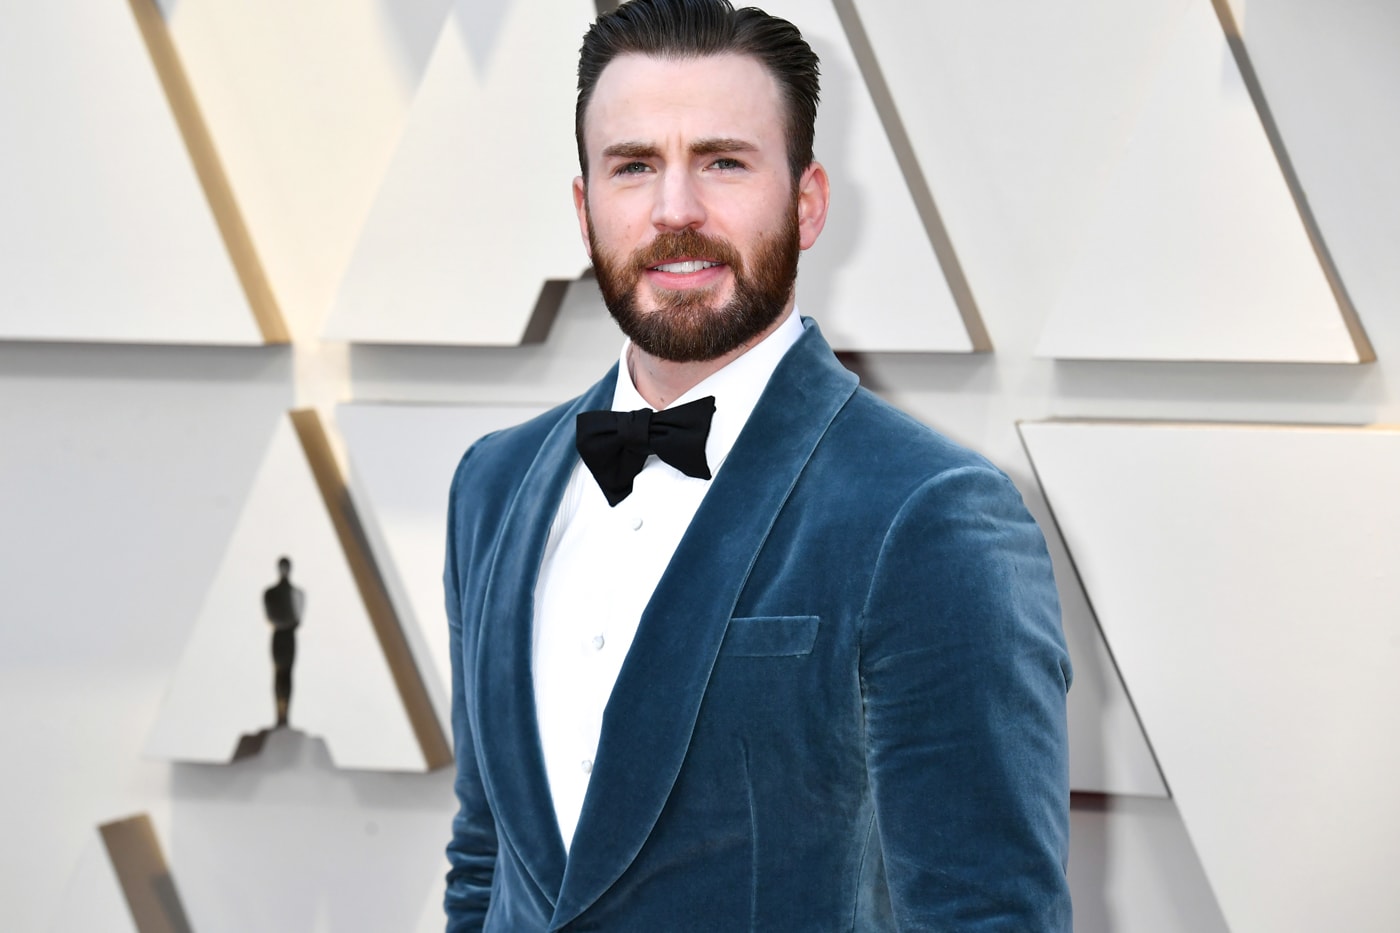 Chris Evans Sides With Quentin Tarantino on His Marvel Movie Star Comment, Agreeing That "the Character Is the Star" captain america gq profile marvel cinematic universe mcu kevin feige